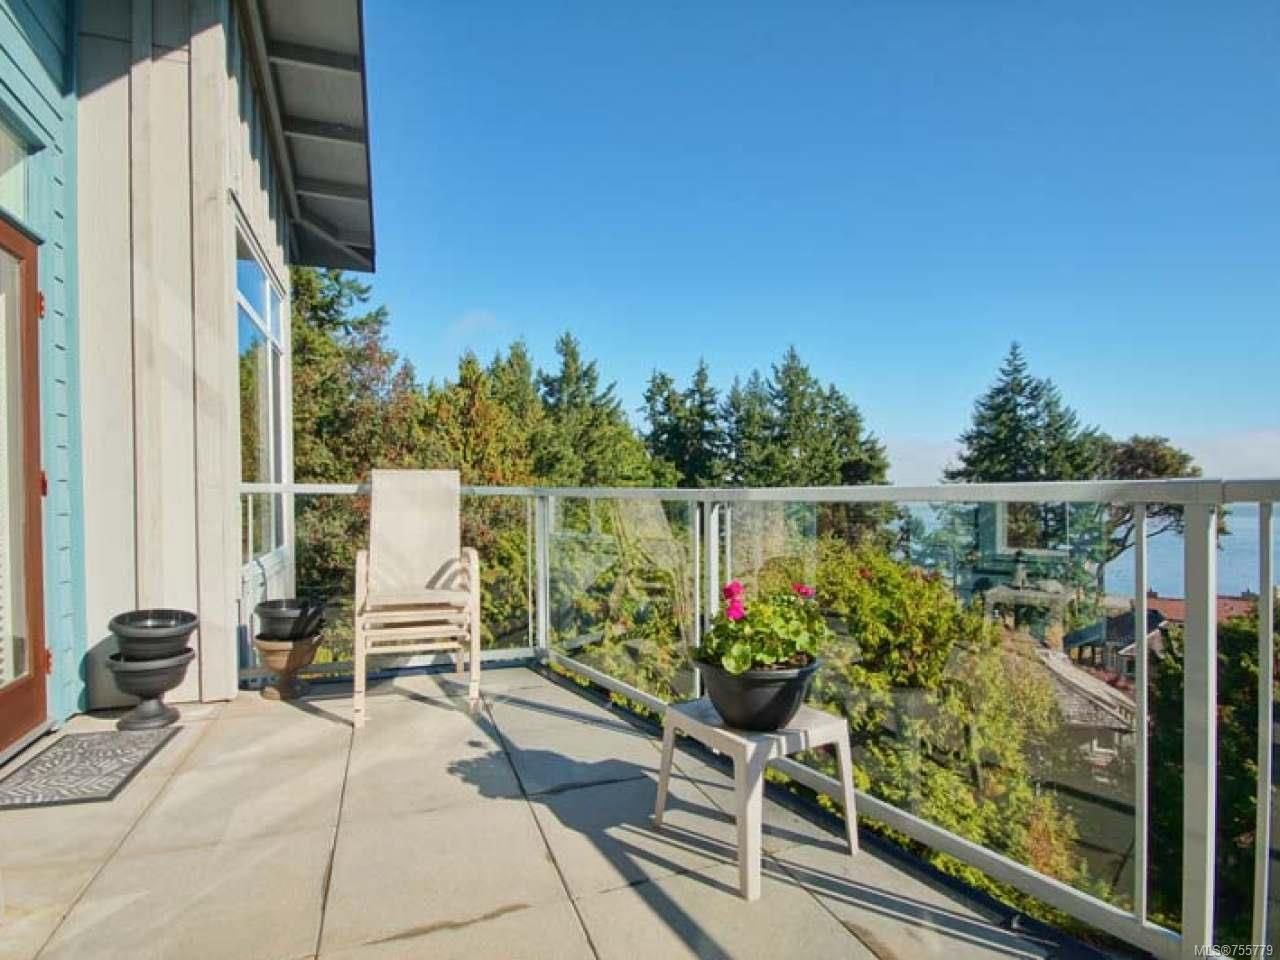 Photo 27: Photos: 26 1059 TANGLEWOOD PLACE in PARKSVILLE: PQ Parksville Row/Townhouse for sale (Parksville/Qualicum)  : MLS®# 755779